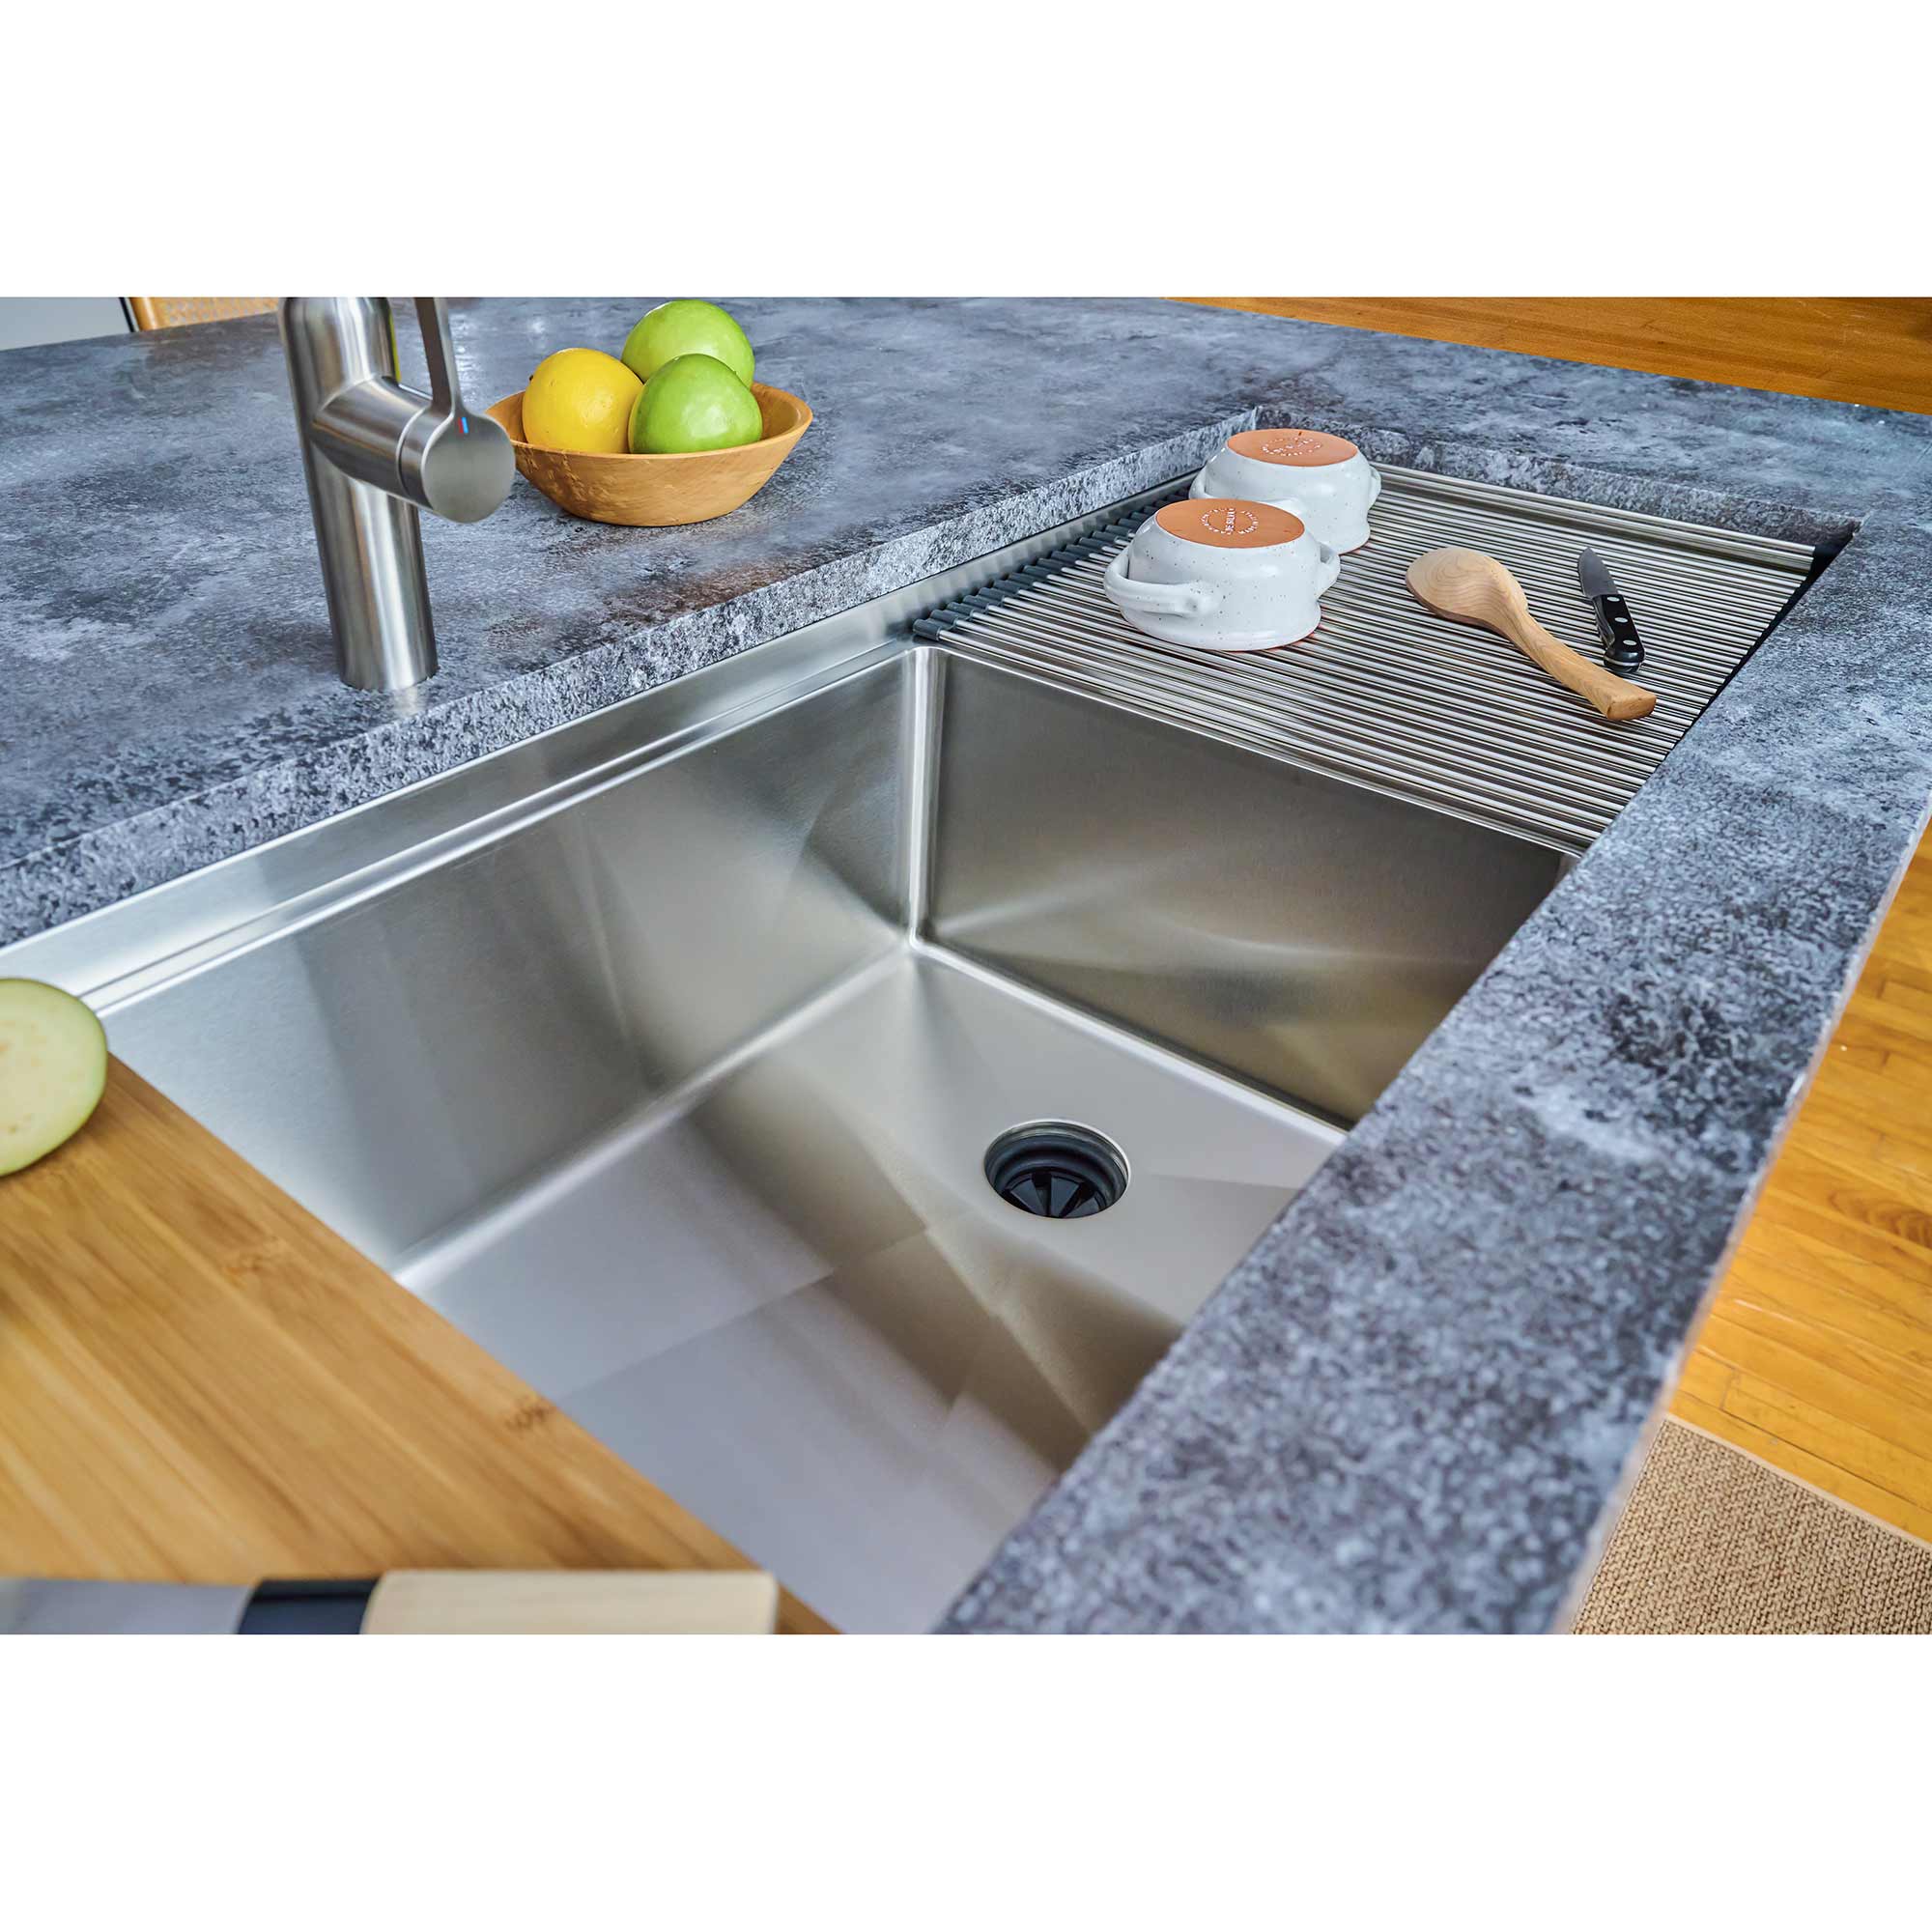  50 inch undermount 16 gauge stainless steel single basin workstation sink with integral drainboard and sink accessories